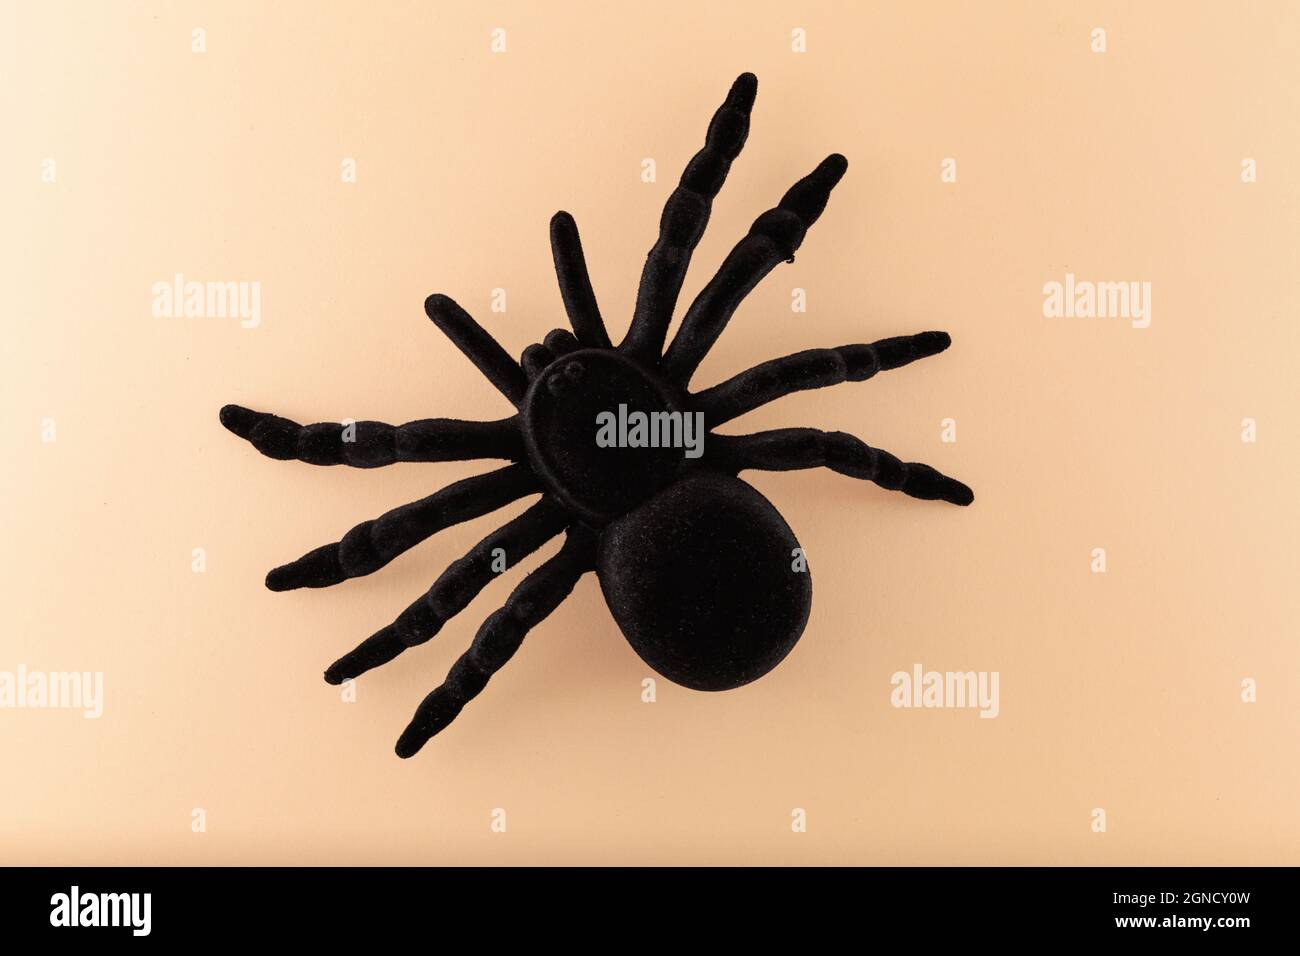 Top view of a black toy spider isolated on a beige background. The skin of the spider is made of velvet-like fabric. Stock Photo